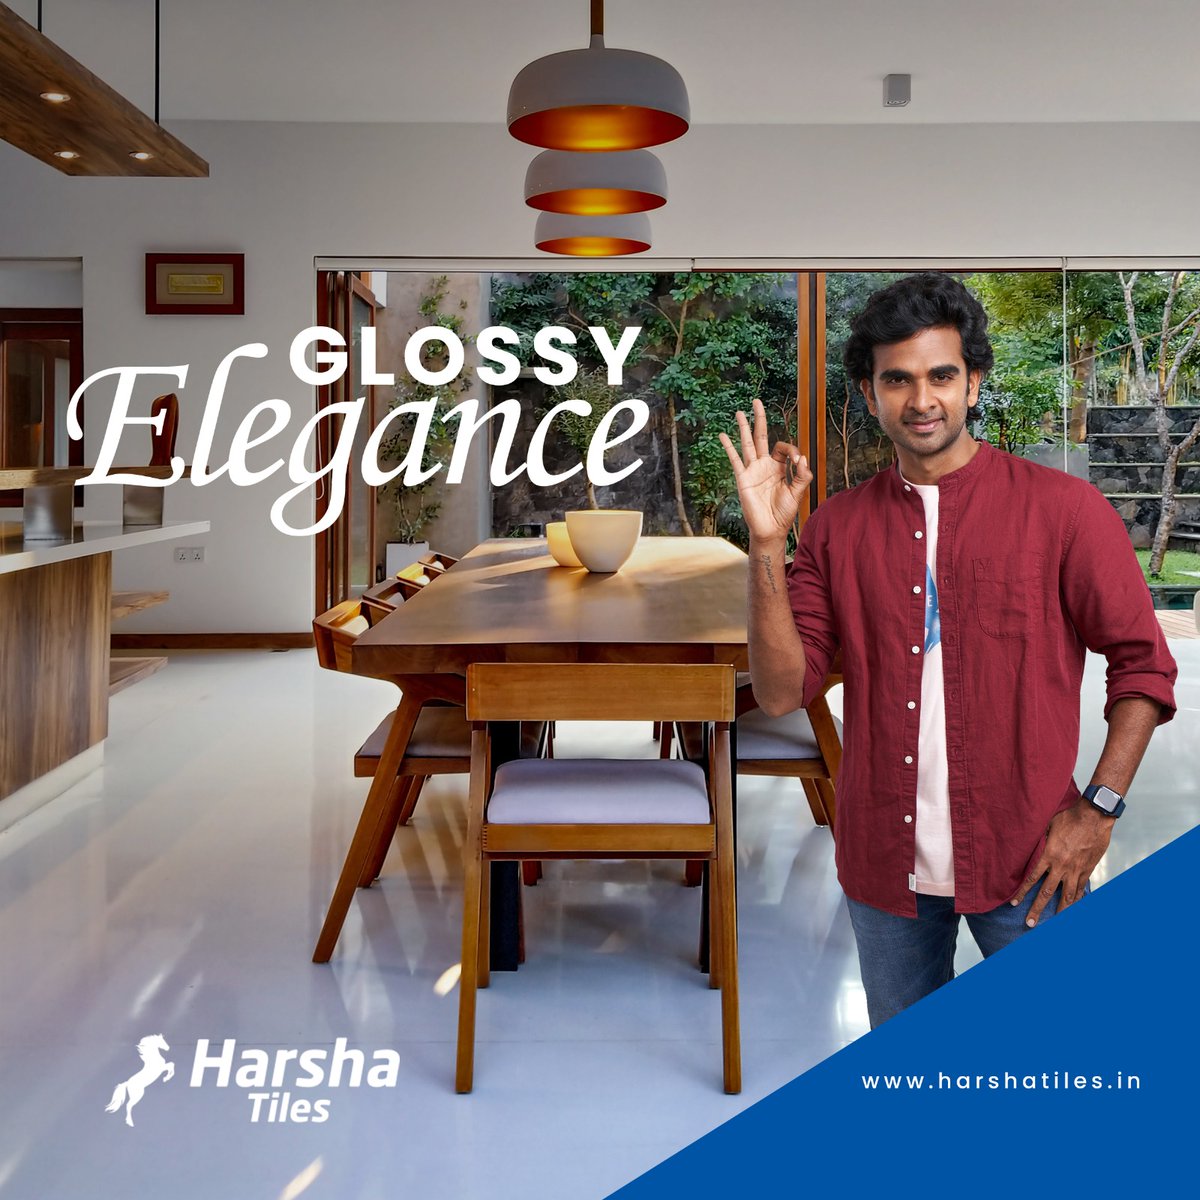 Immerse yourself in luxury with Glossy Elegance of Harsha Tiles' . Elevate your space with radiant surfaces and sophisticated style, creating an ambiance of timeless opulence.
.
.
.
#HarshaTiles #GlossyElegance #LuxuryTiles #SophisticatedStyle #TimelessDesign #HomeDecor